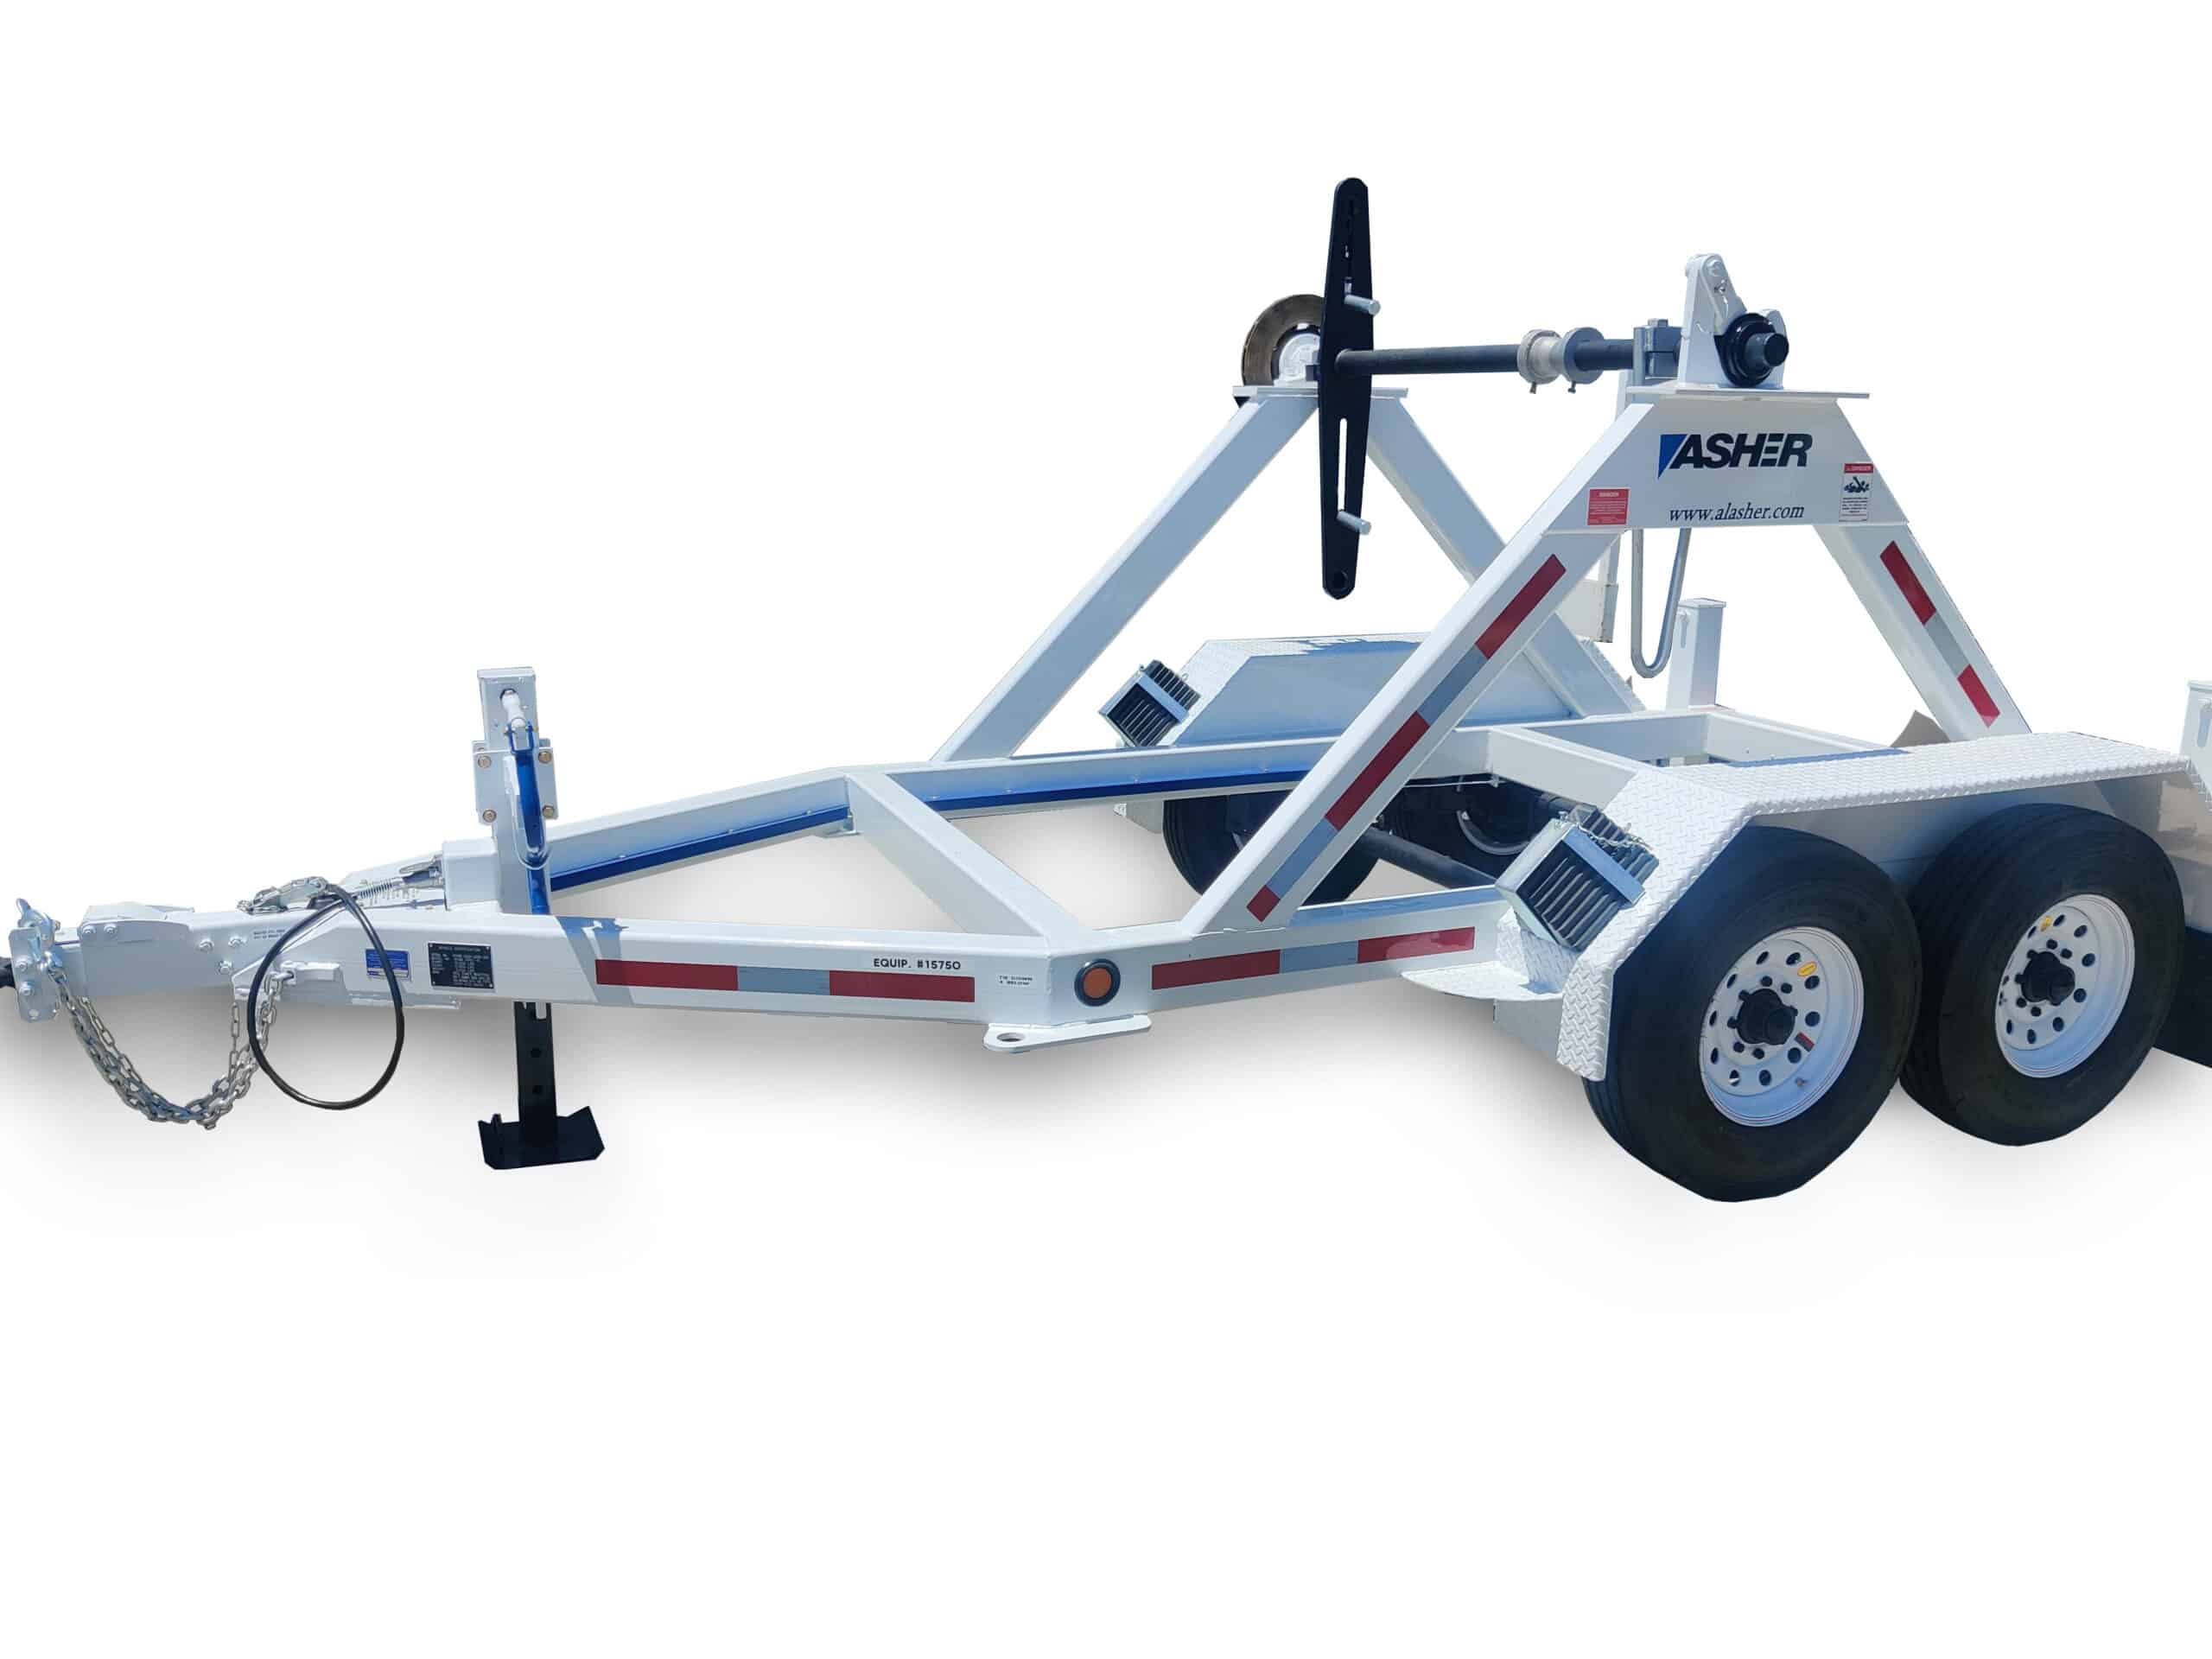 REEL-O-MATIC Cable Reel Trailer with Tensioning Brake for Rental